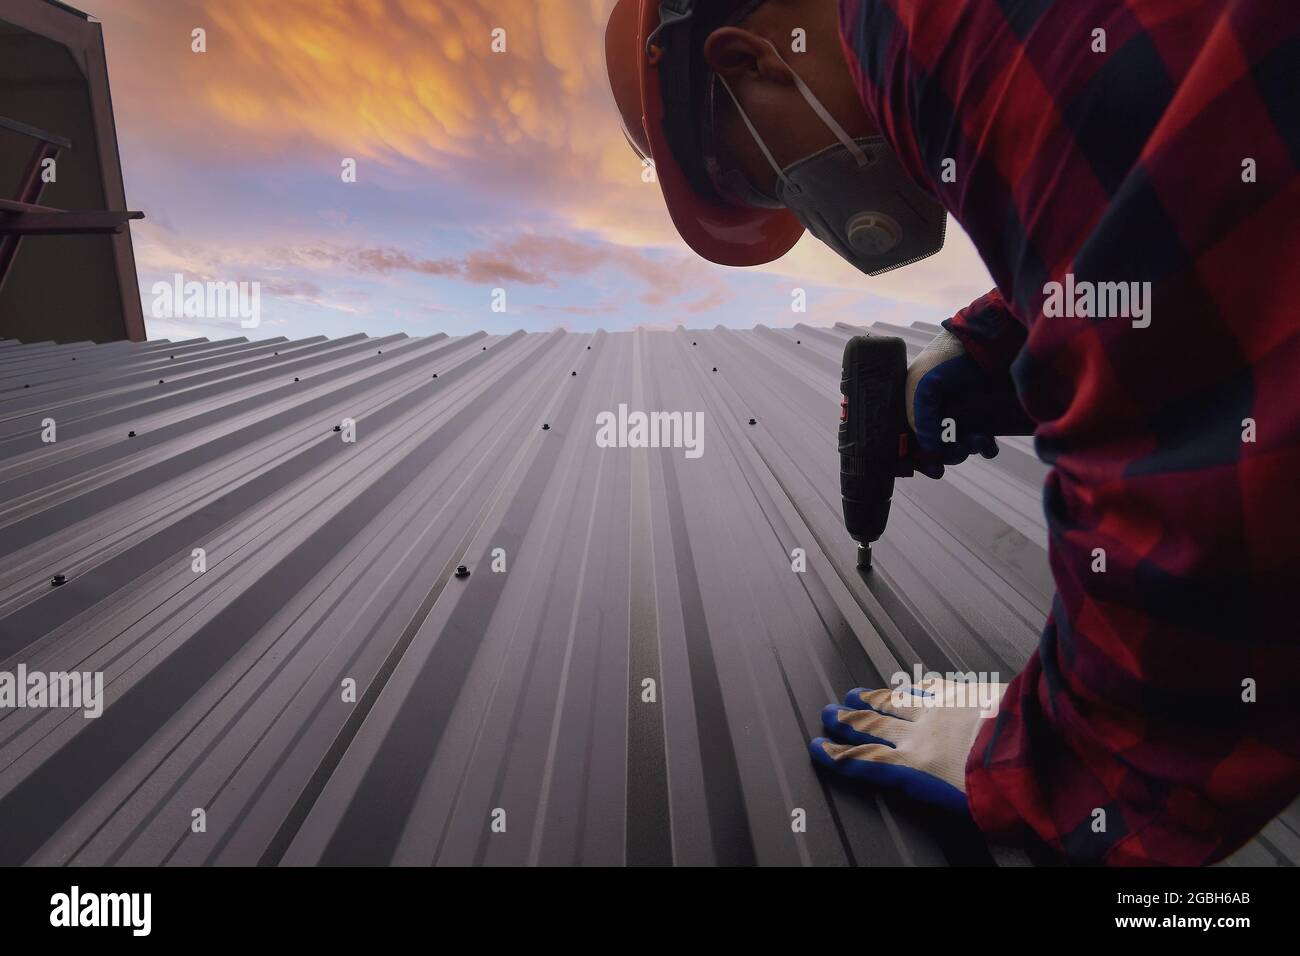 Construction worker installing metal sheets on a roof, Thailand Stock Photo